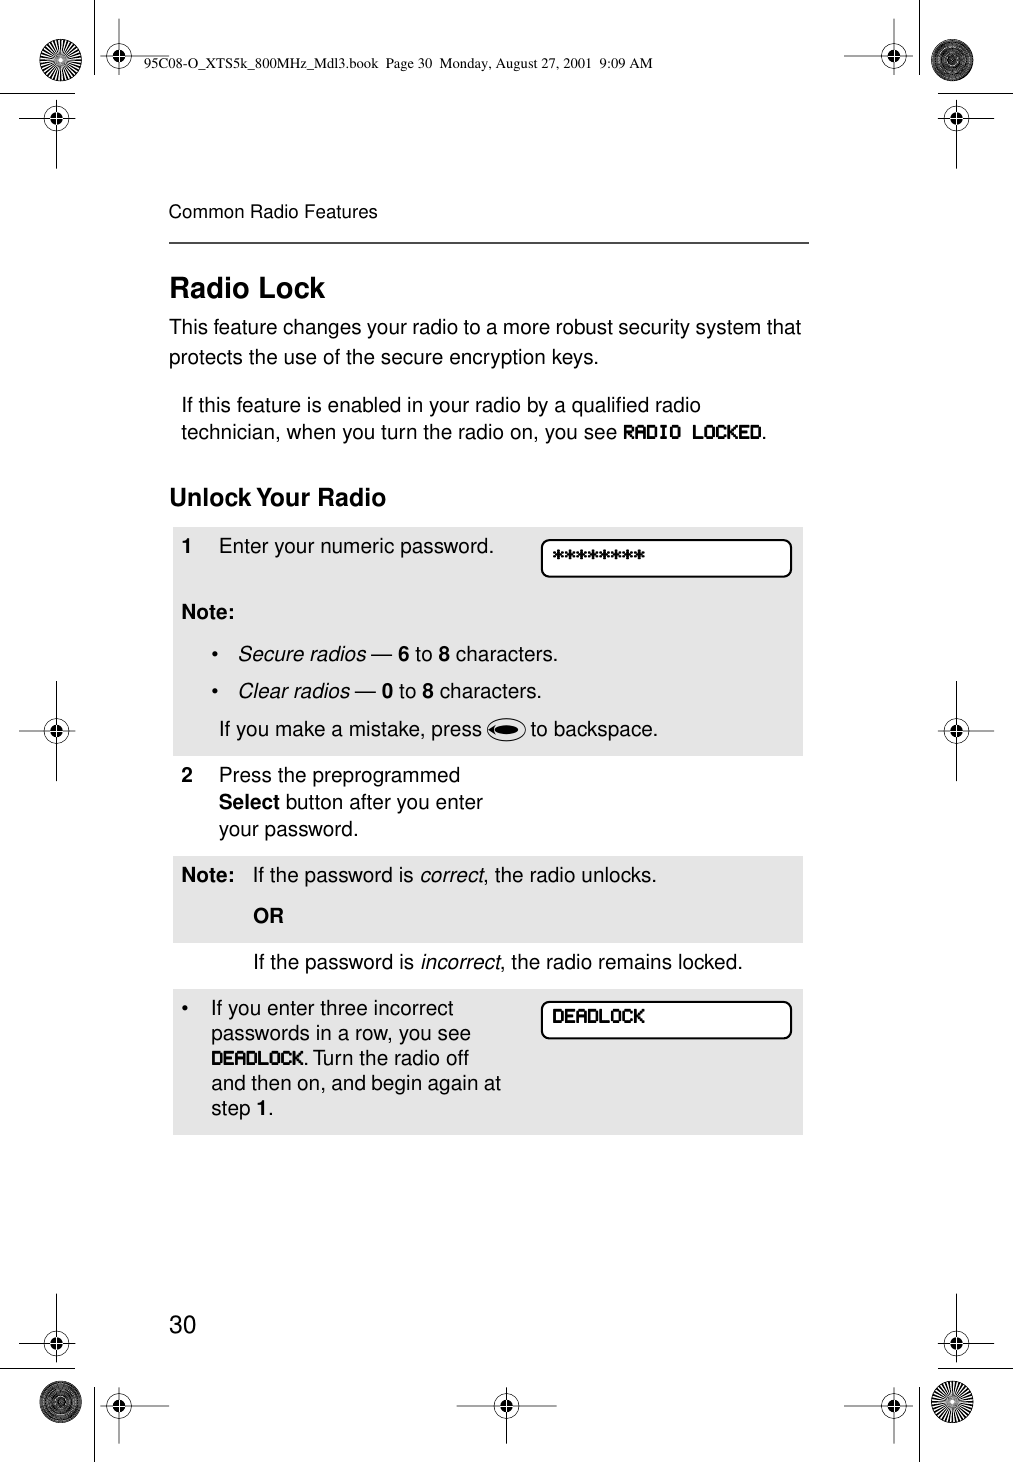 30Common Radio FeaturesRadio LockThis feature changes your radio to a more robust security system that protects the use of the secure encryption keys. Unlock Your  RadioIf this feature is enabled in your radio by a qualiﬁed radio technician, when you turn the radio on, you see RRRRAAAADDDDIIIIOOOO    LLLLOOOOCCCCKKKKEEEEDDDD.1Enter your numeric password.Note:•Secure radios — 6 to 8 characters.•Clear radios — 0 to 8 characters.If you make a mistake, press V to backspace.2Press the preprogrammed Select button after you enter your password.Note: If the password is correct, the radio unlocks.ORIf the password is incorrect, the radio remains locked. • If you enter three incorrect passwords in a row, you see DDDDEEEEAAAADDDDLLLLOOOOCCCCKKKK. Turn the radio off and then on, and begin again at step 1.********************************DDDDEEEEAAAADDDDLLLLOOOOCCCCKKKK95C08-O_XTS5k_800MHz_Mdl3.book  Page 30  Monday, August 27, 2001  9:09 AM